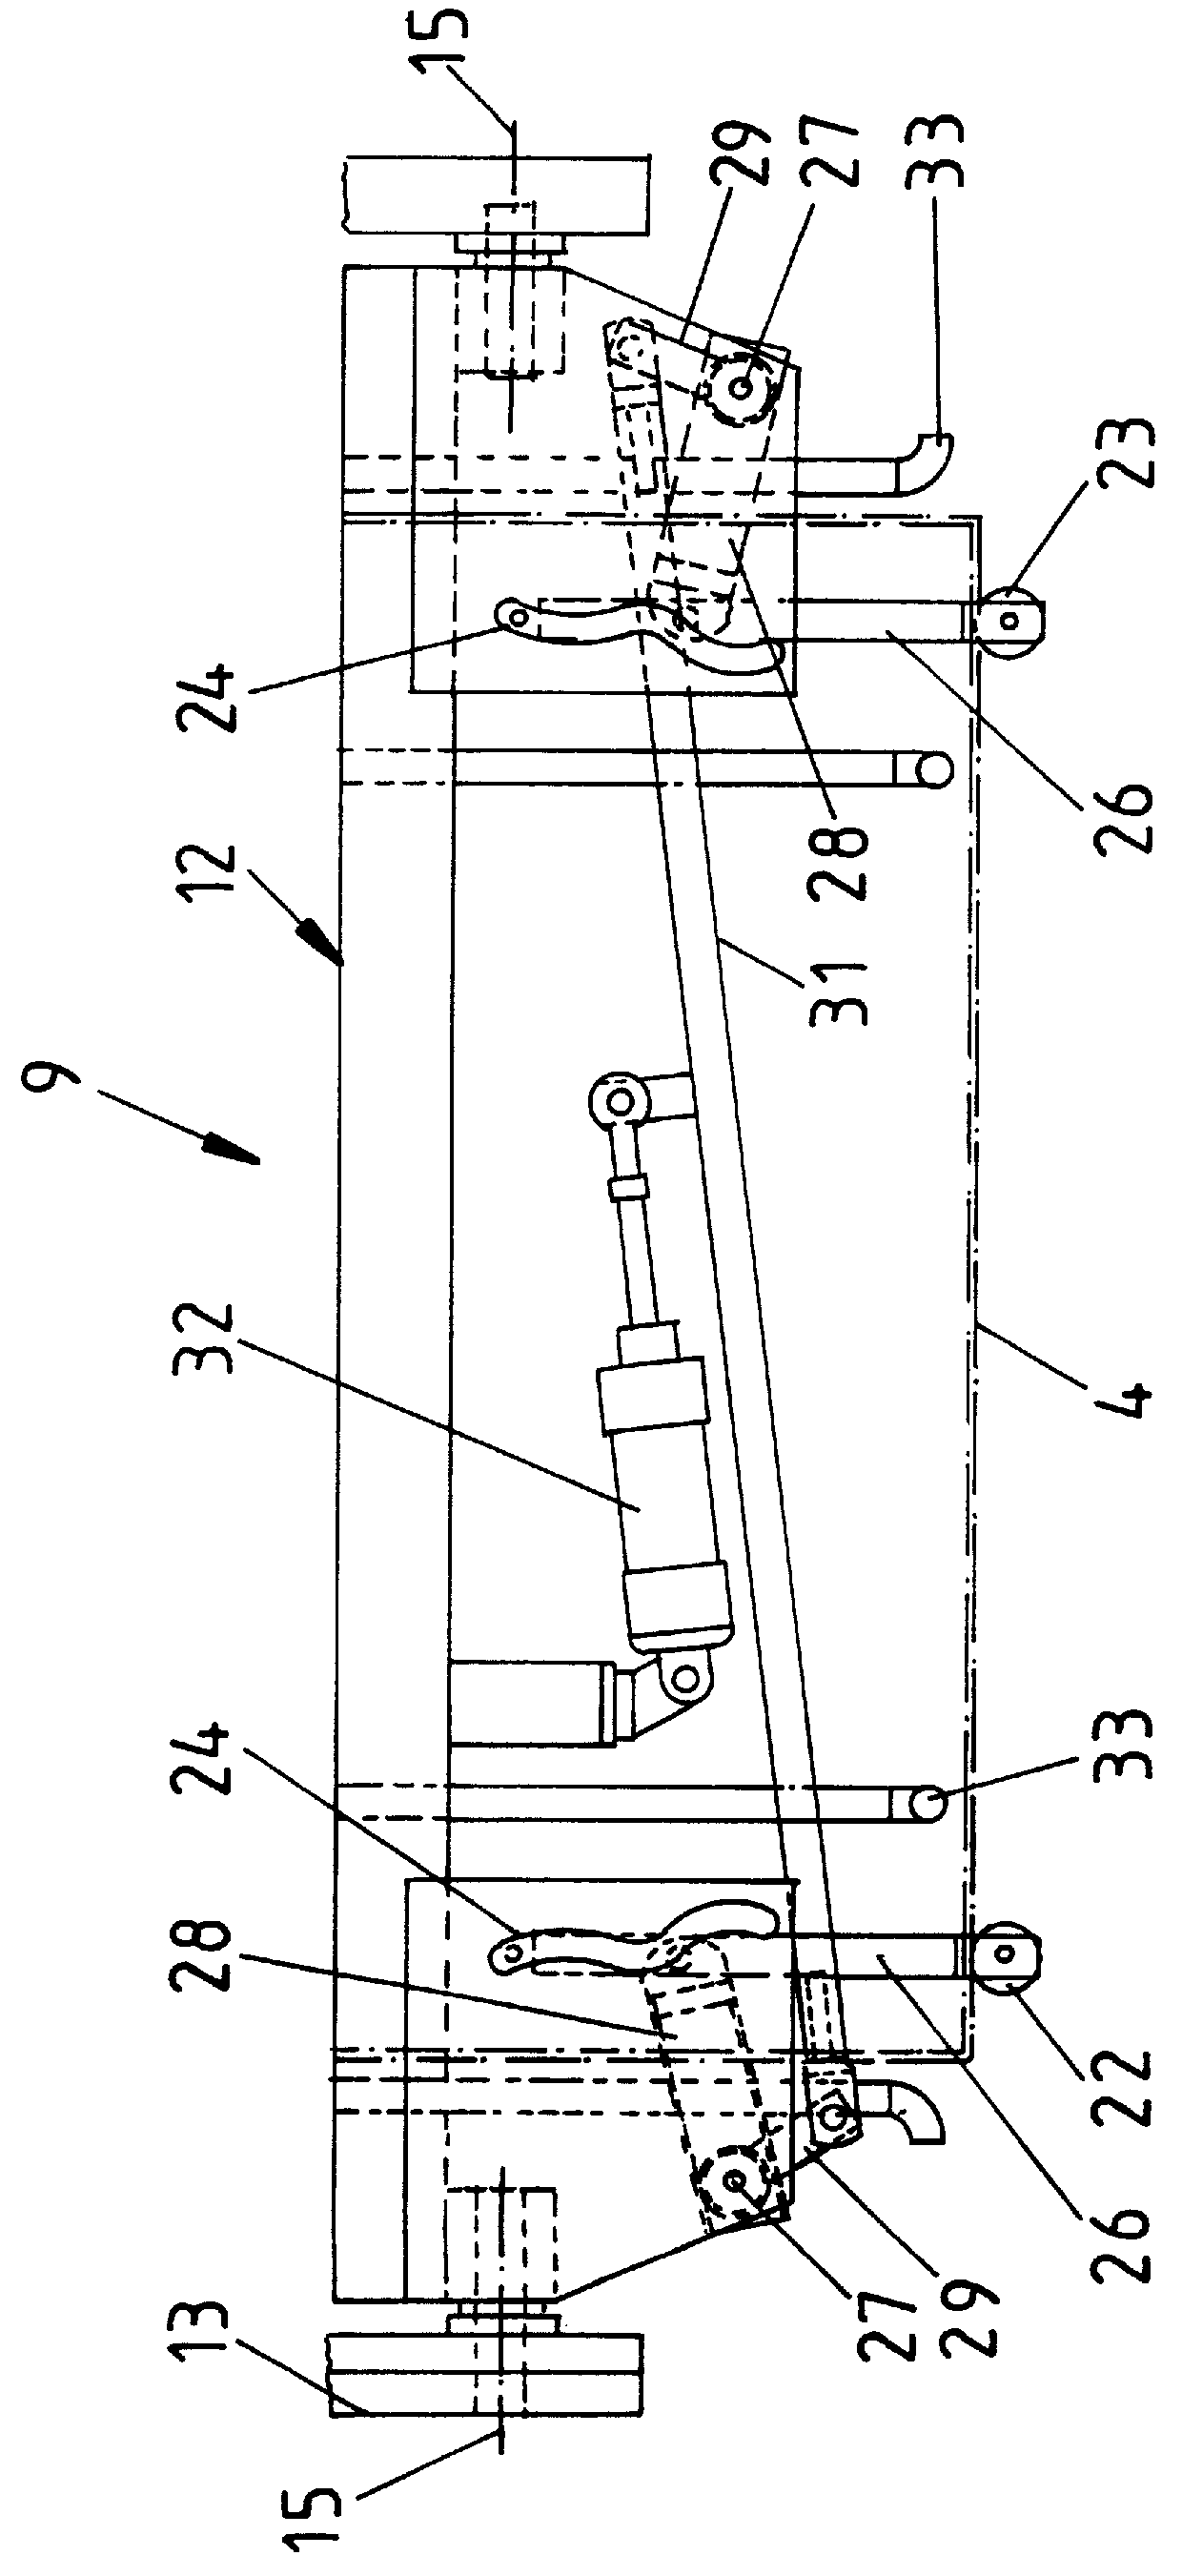 Method of and apparatus for emptying containers for flowable materials such as comminuted tobacco leaves